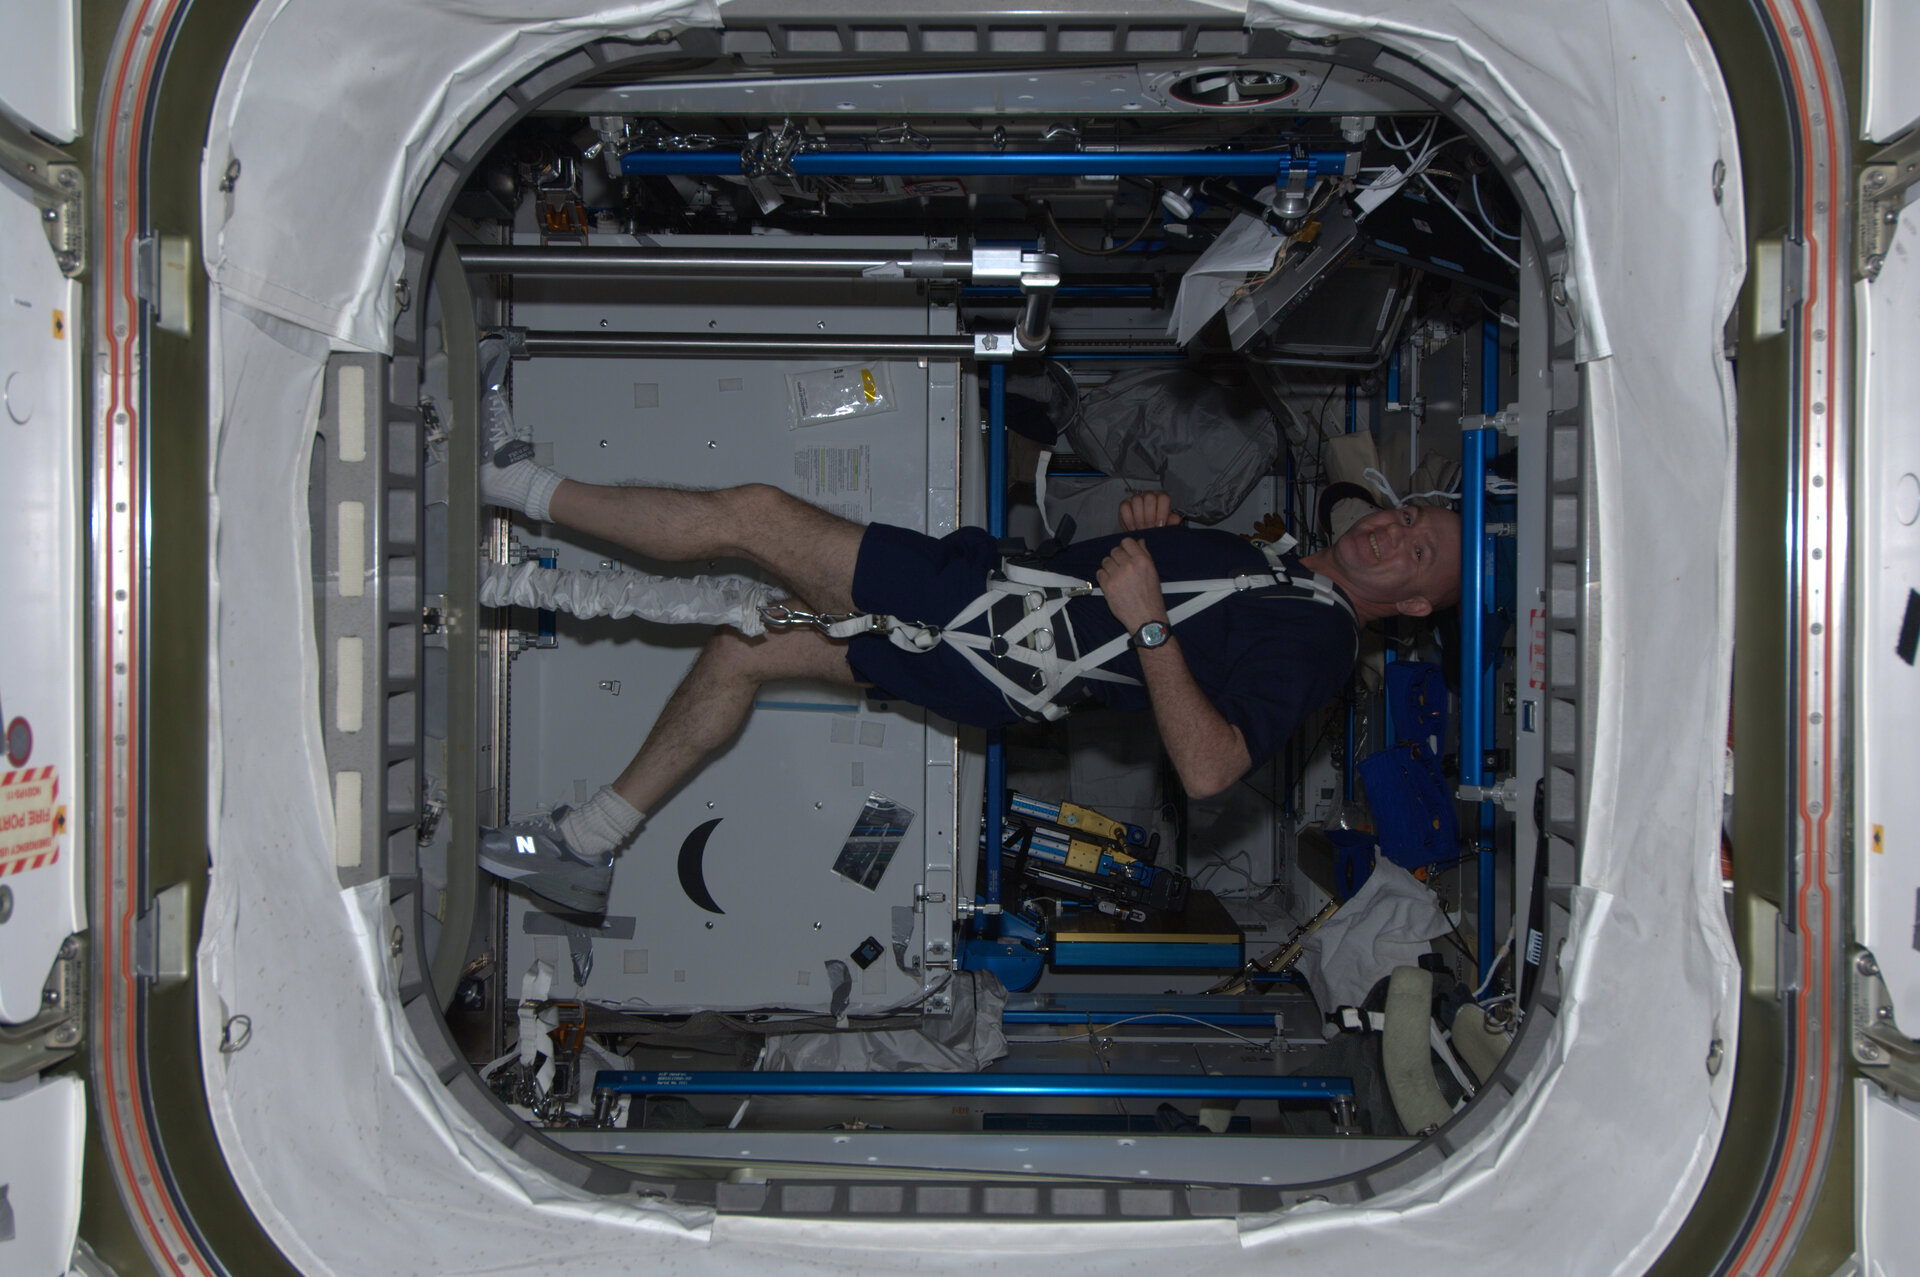 André exercising in space